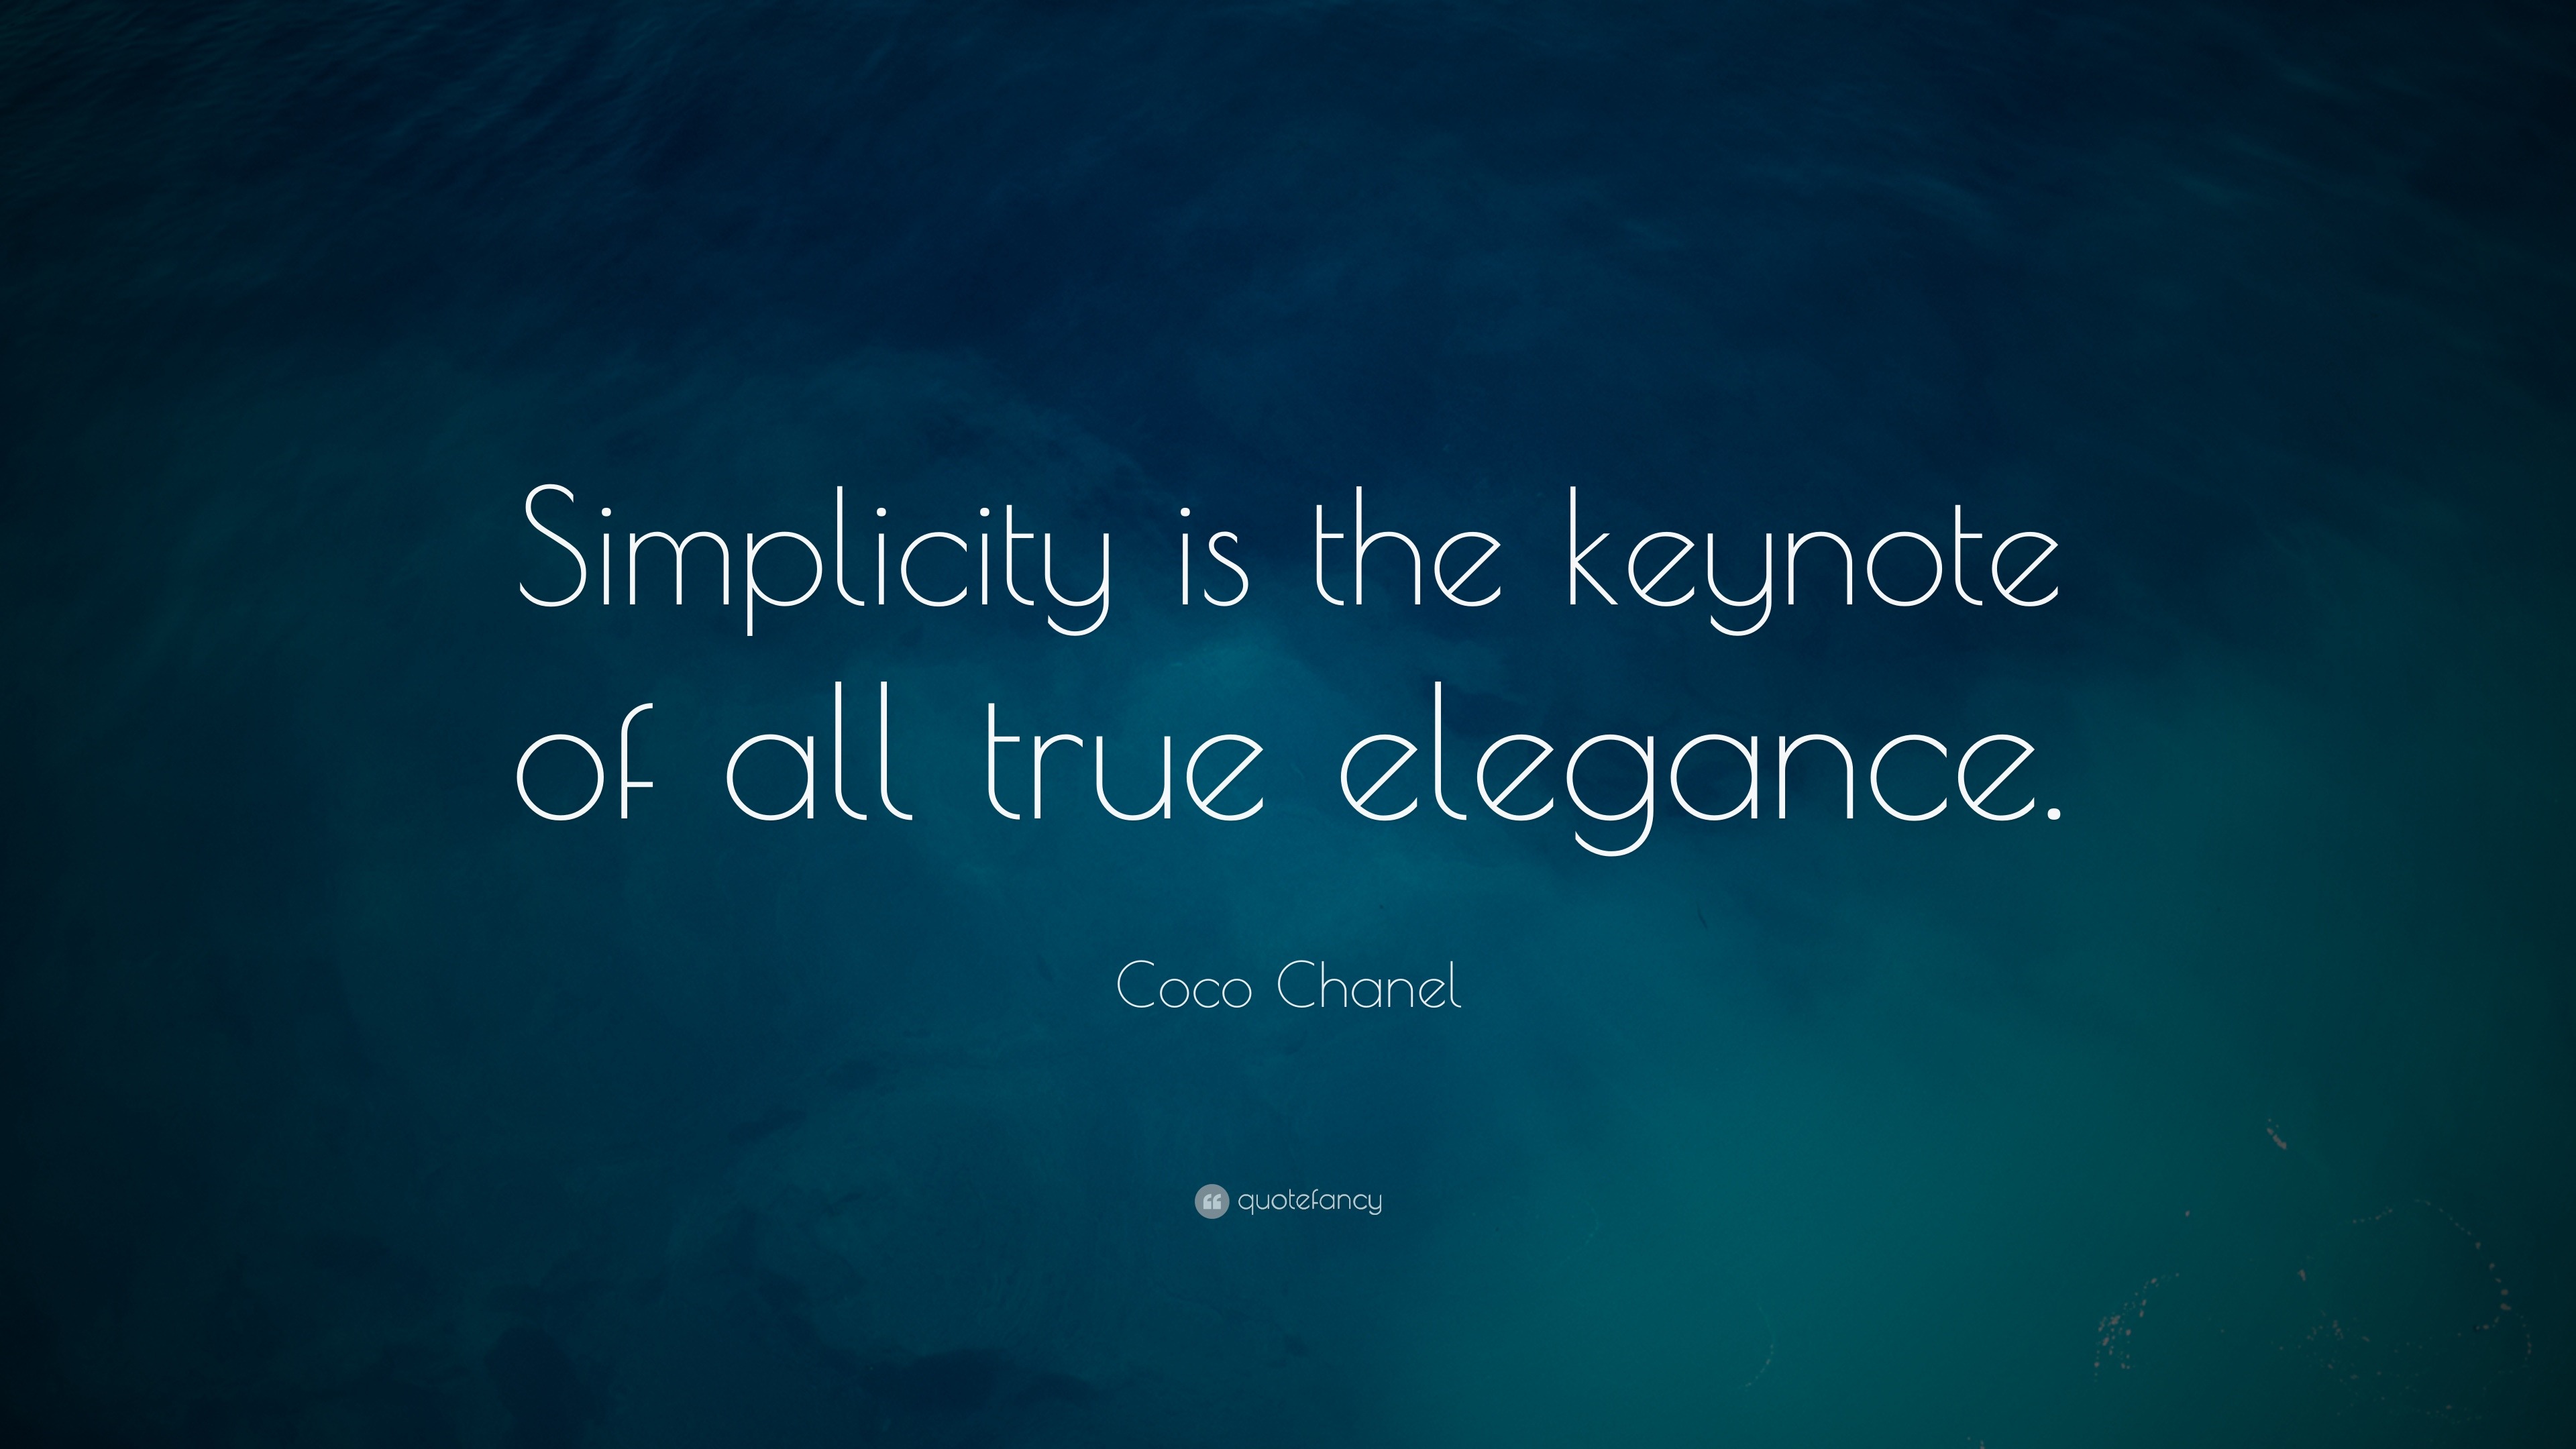 25 Coco Chanel Quotes Every Woman Should Live By  Best Coco Chanel Sayings